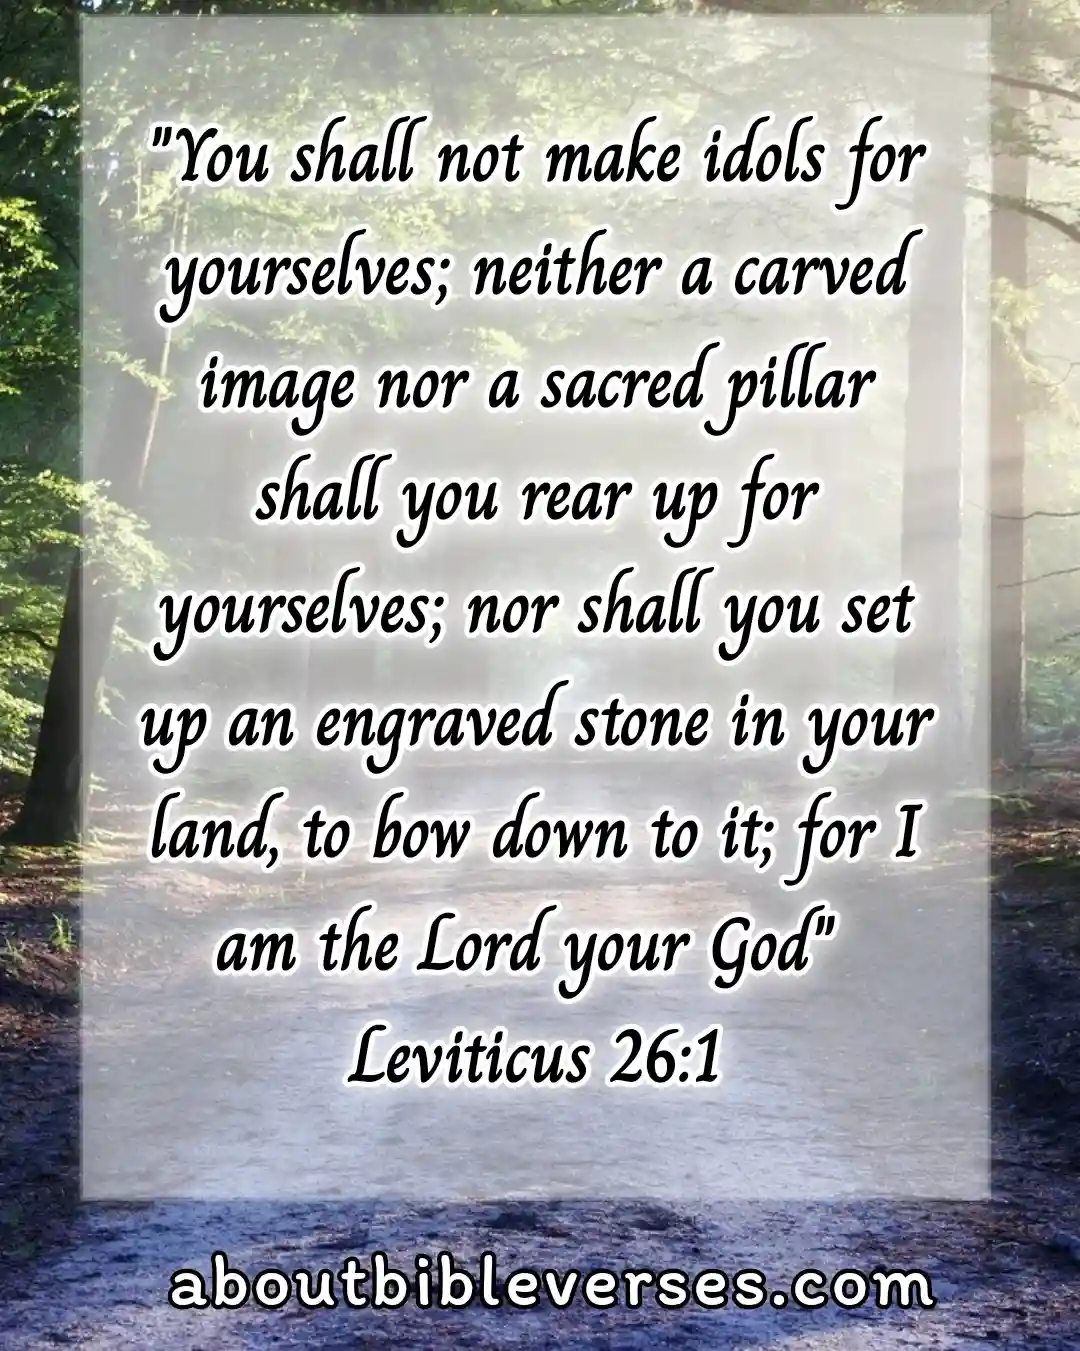 bible verses about idolatry (Leviticus 26:1)